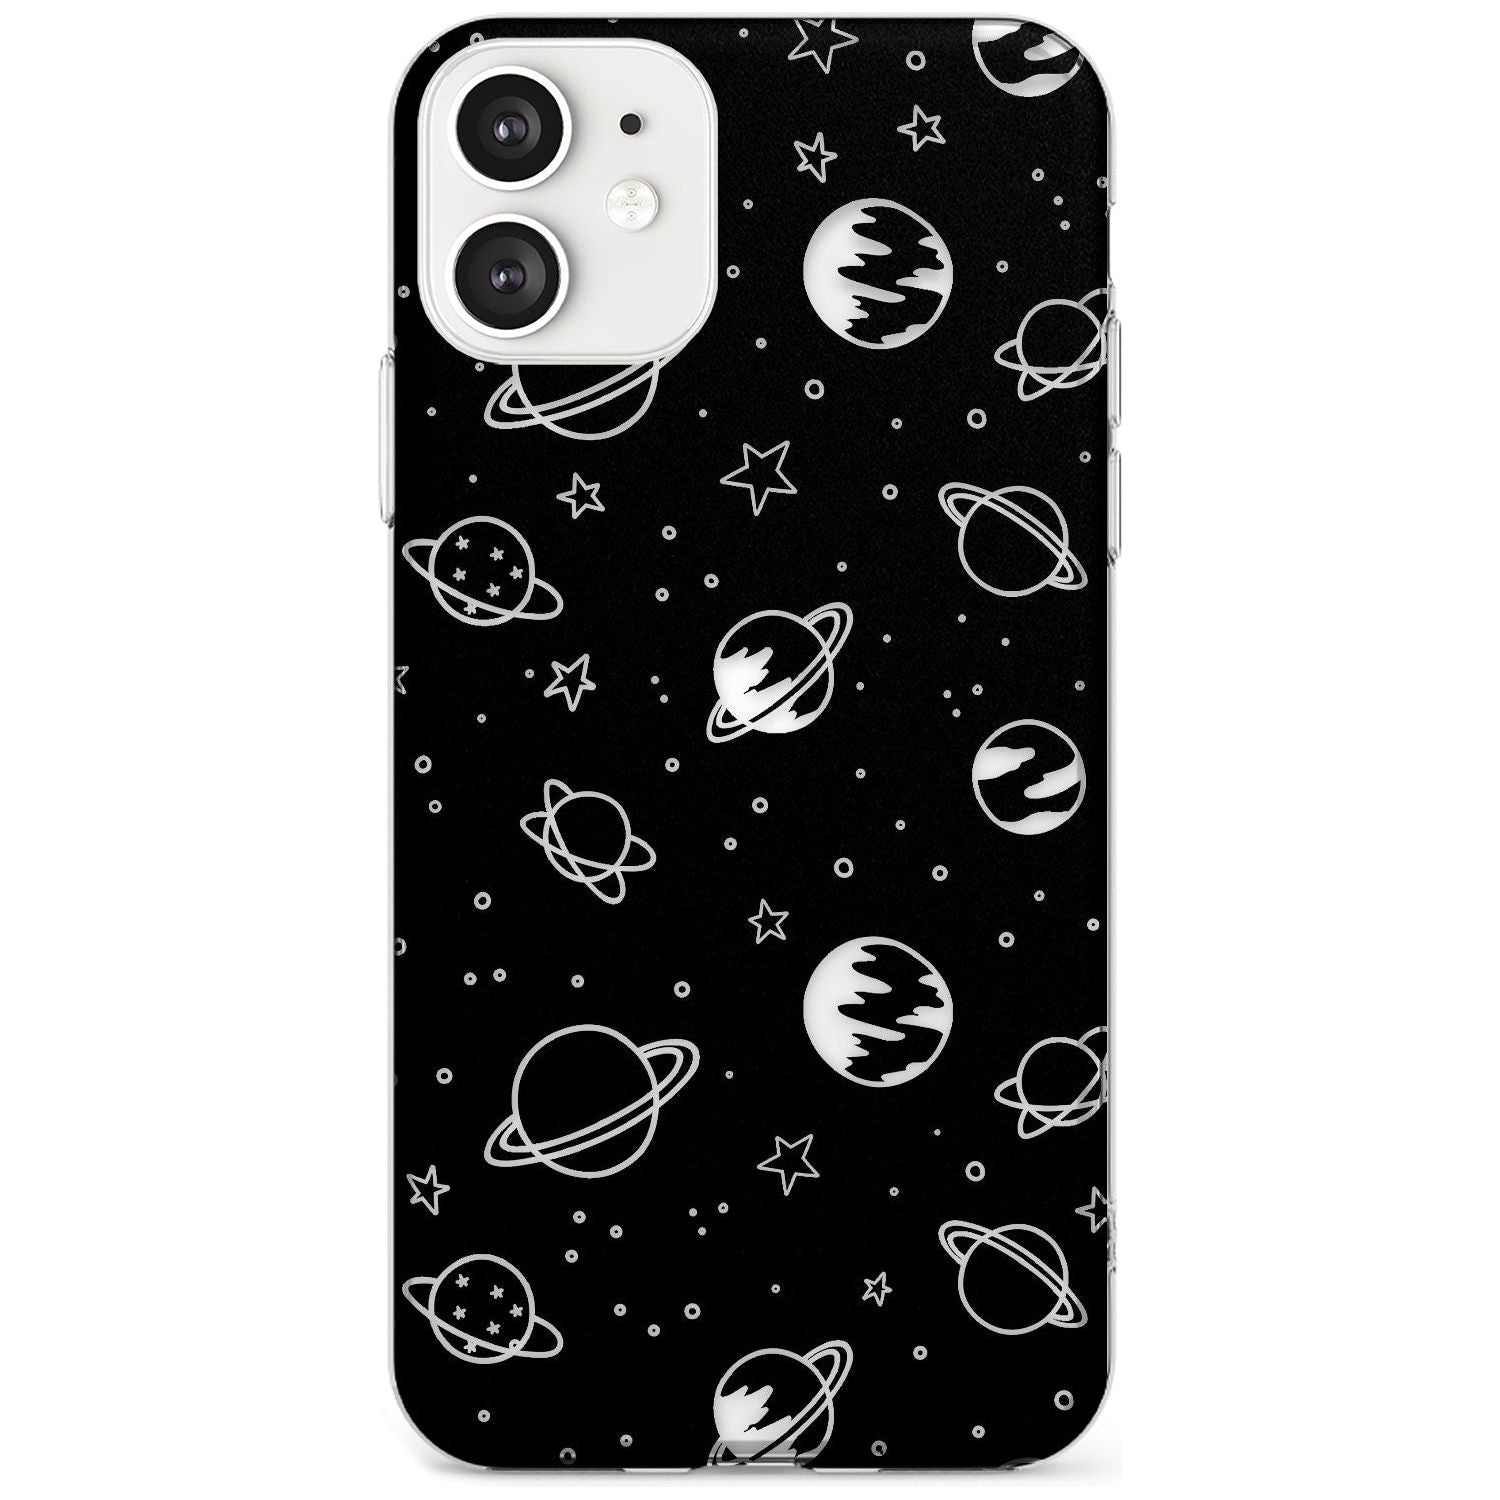 Outer Space Outlines: Clear on Black Black Impact Phone Case for iPhone 11